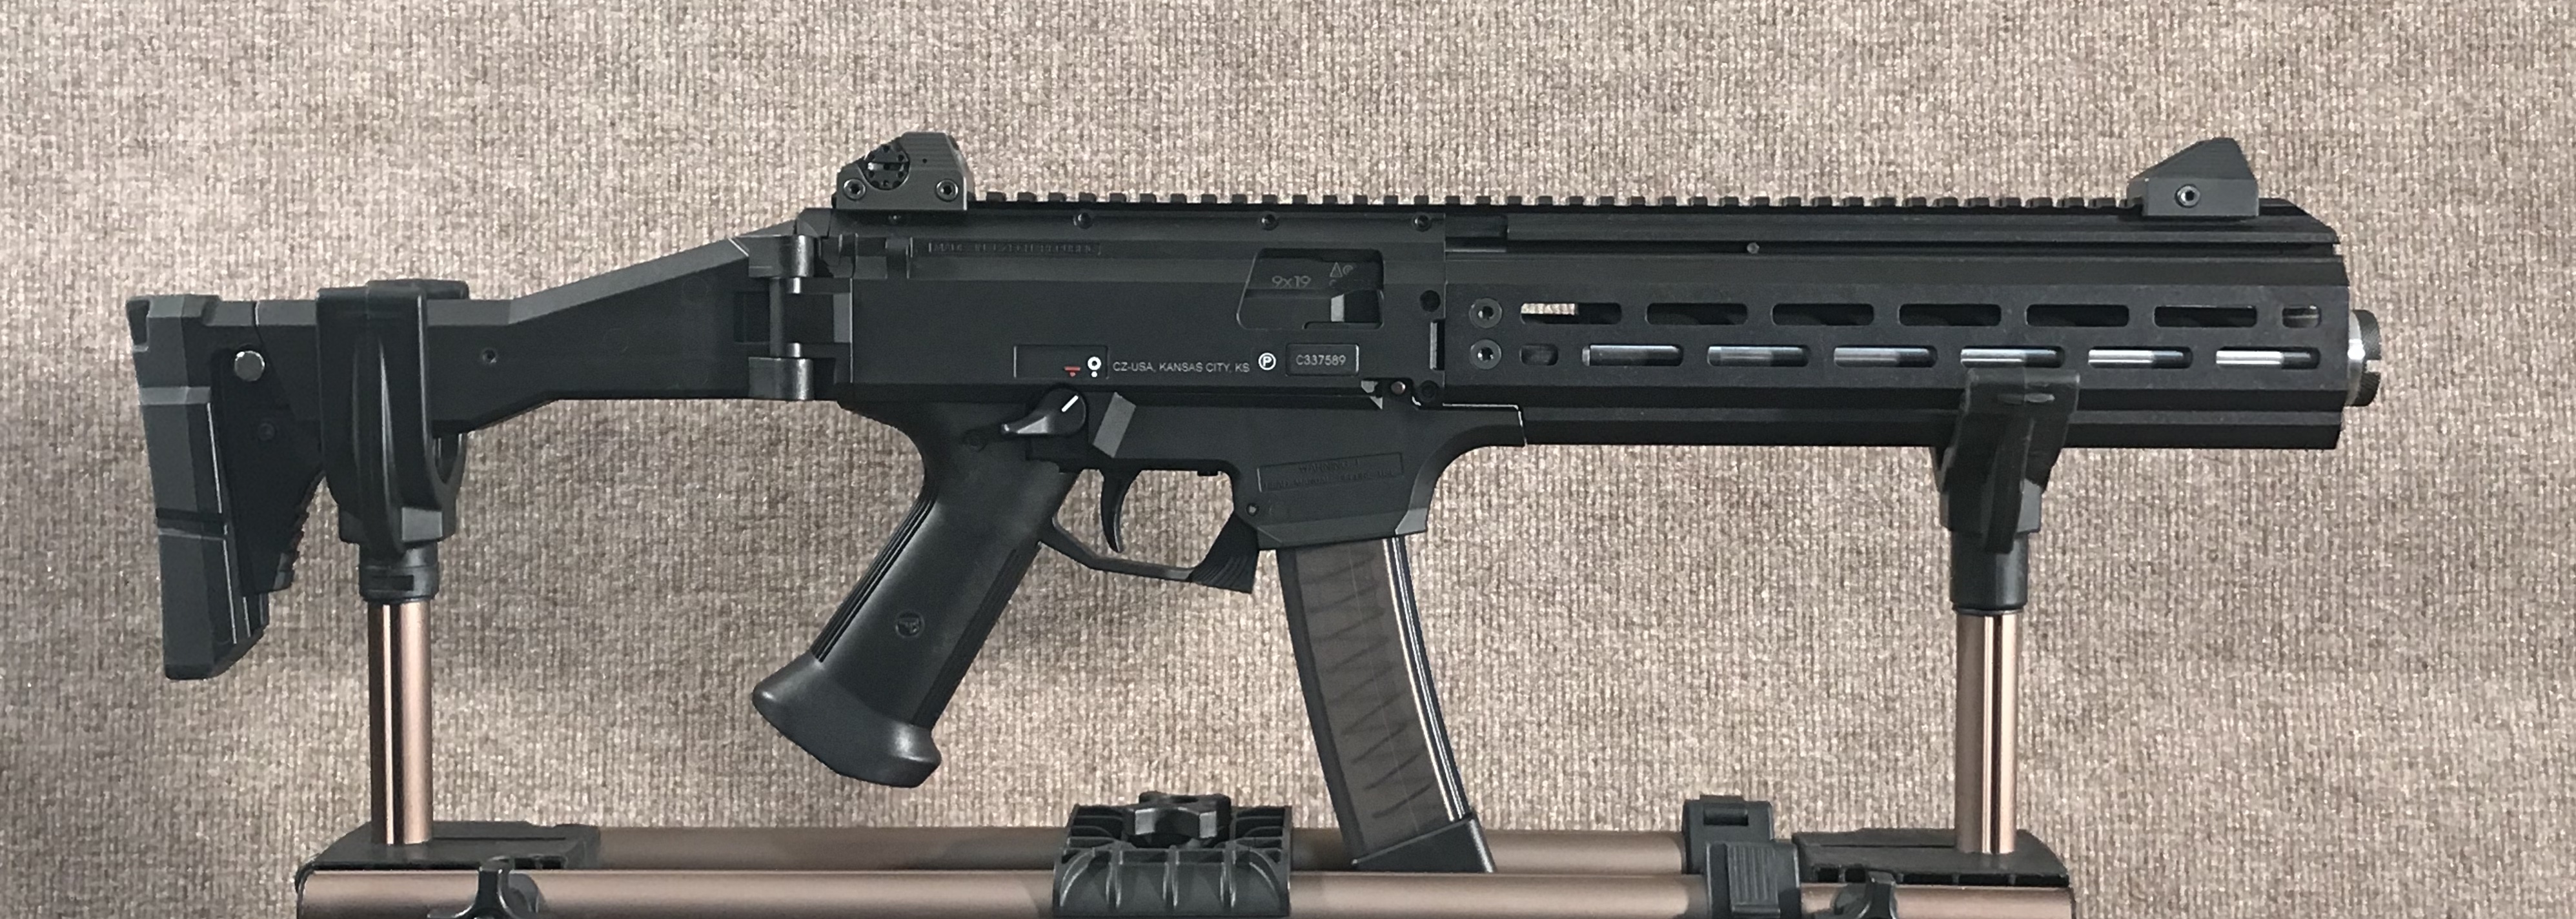 AR 15 Uppers Monolithic Integral Suppressed Barrel.